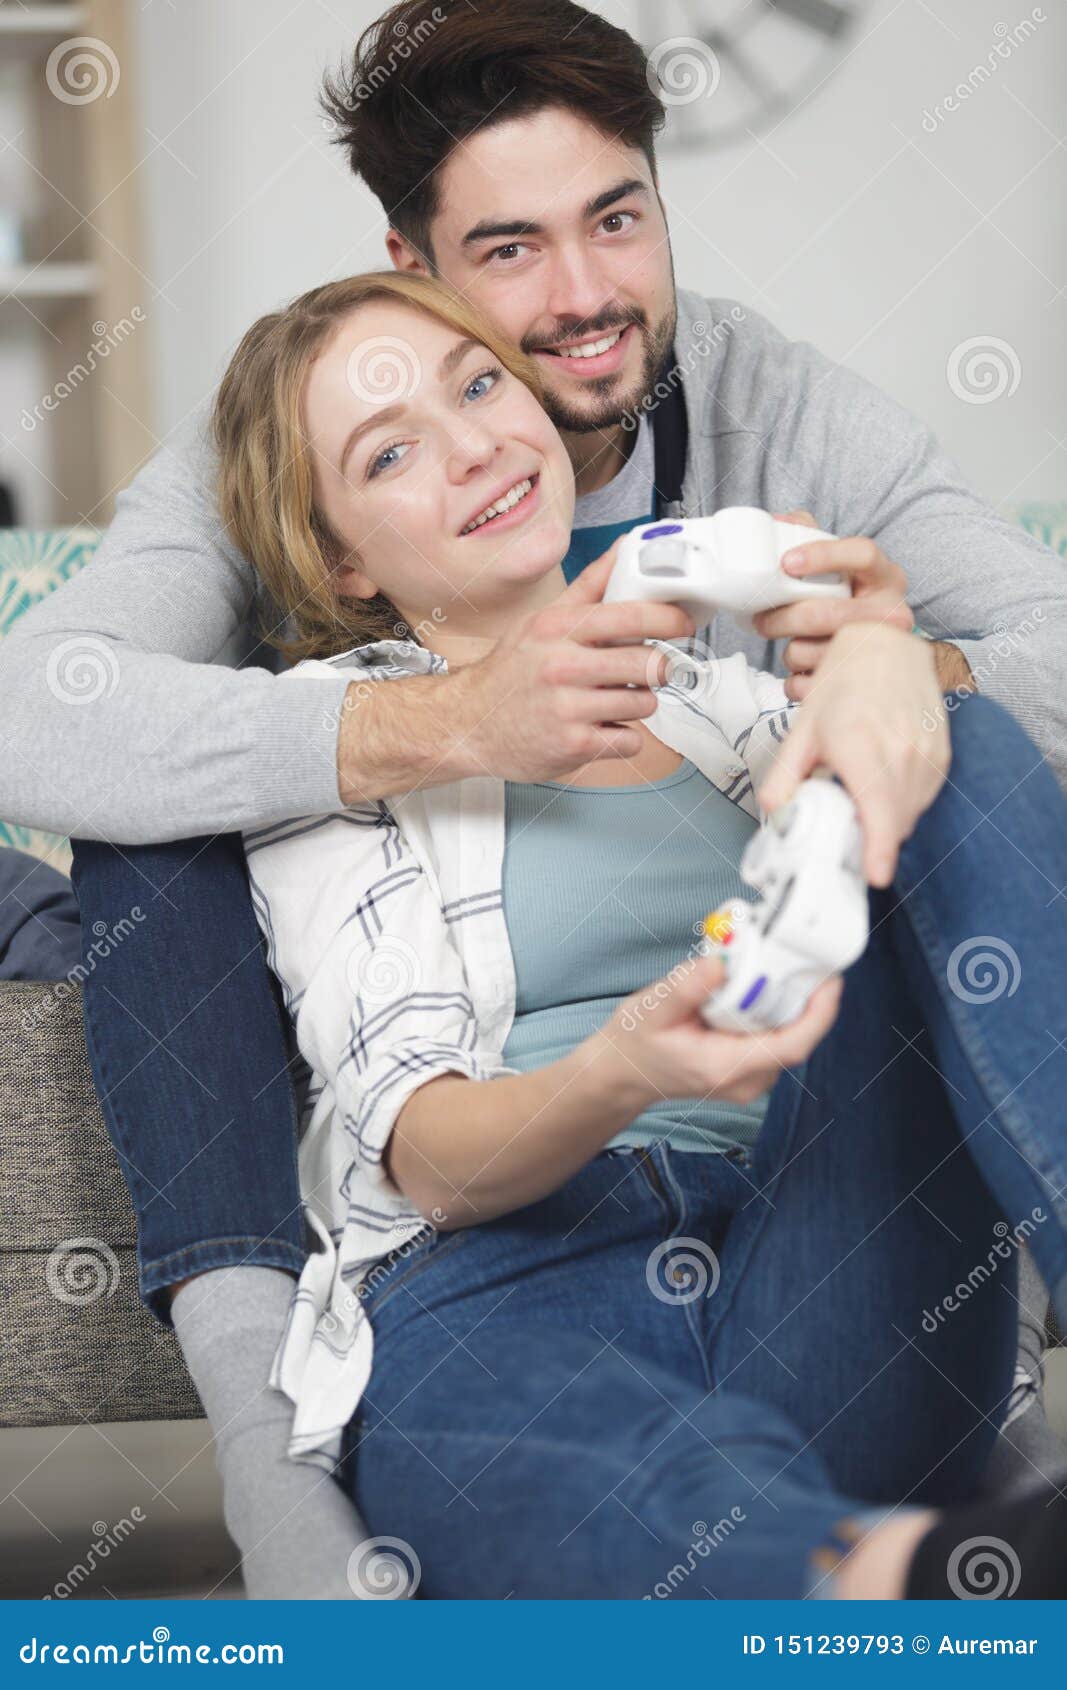 Couple Hugging While Playing Video Games Stock Image Image Of Control Couple 151239793 